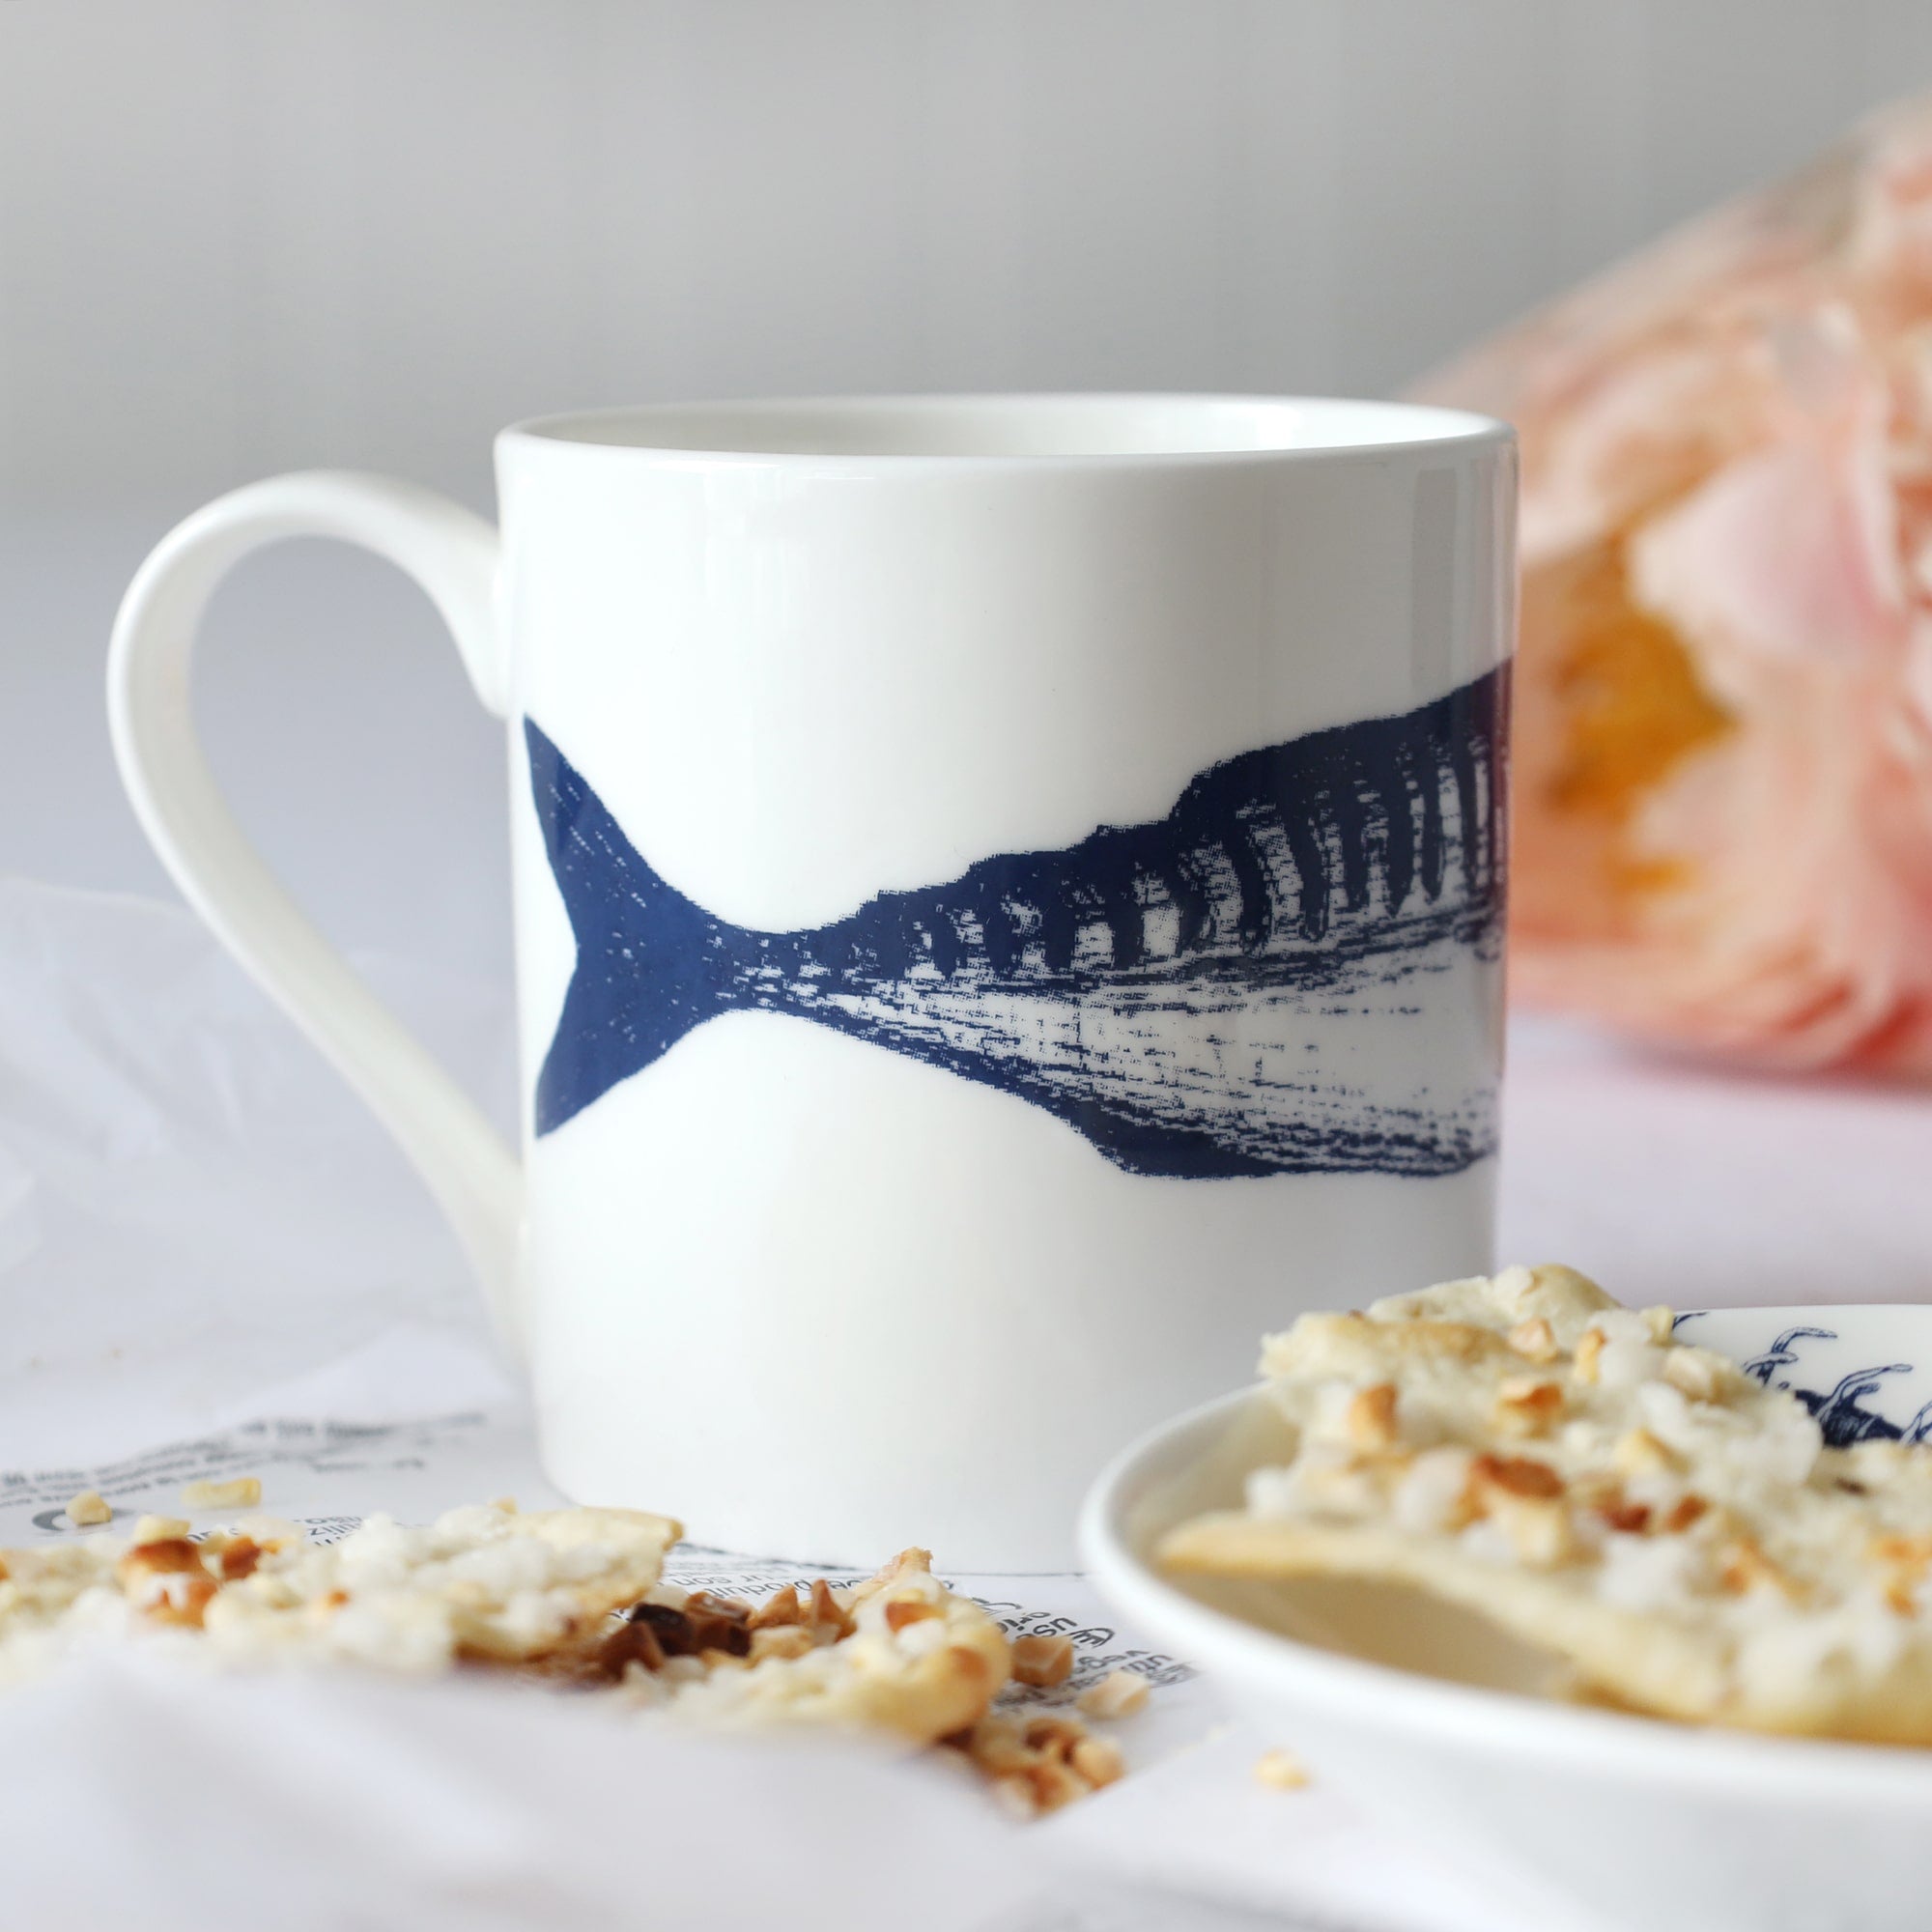 Blue & white bone china mackerel mug, with tail showing  on table with biscuits & flowers.